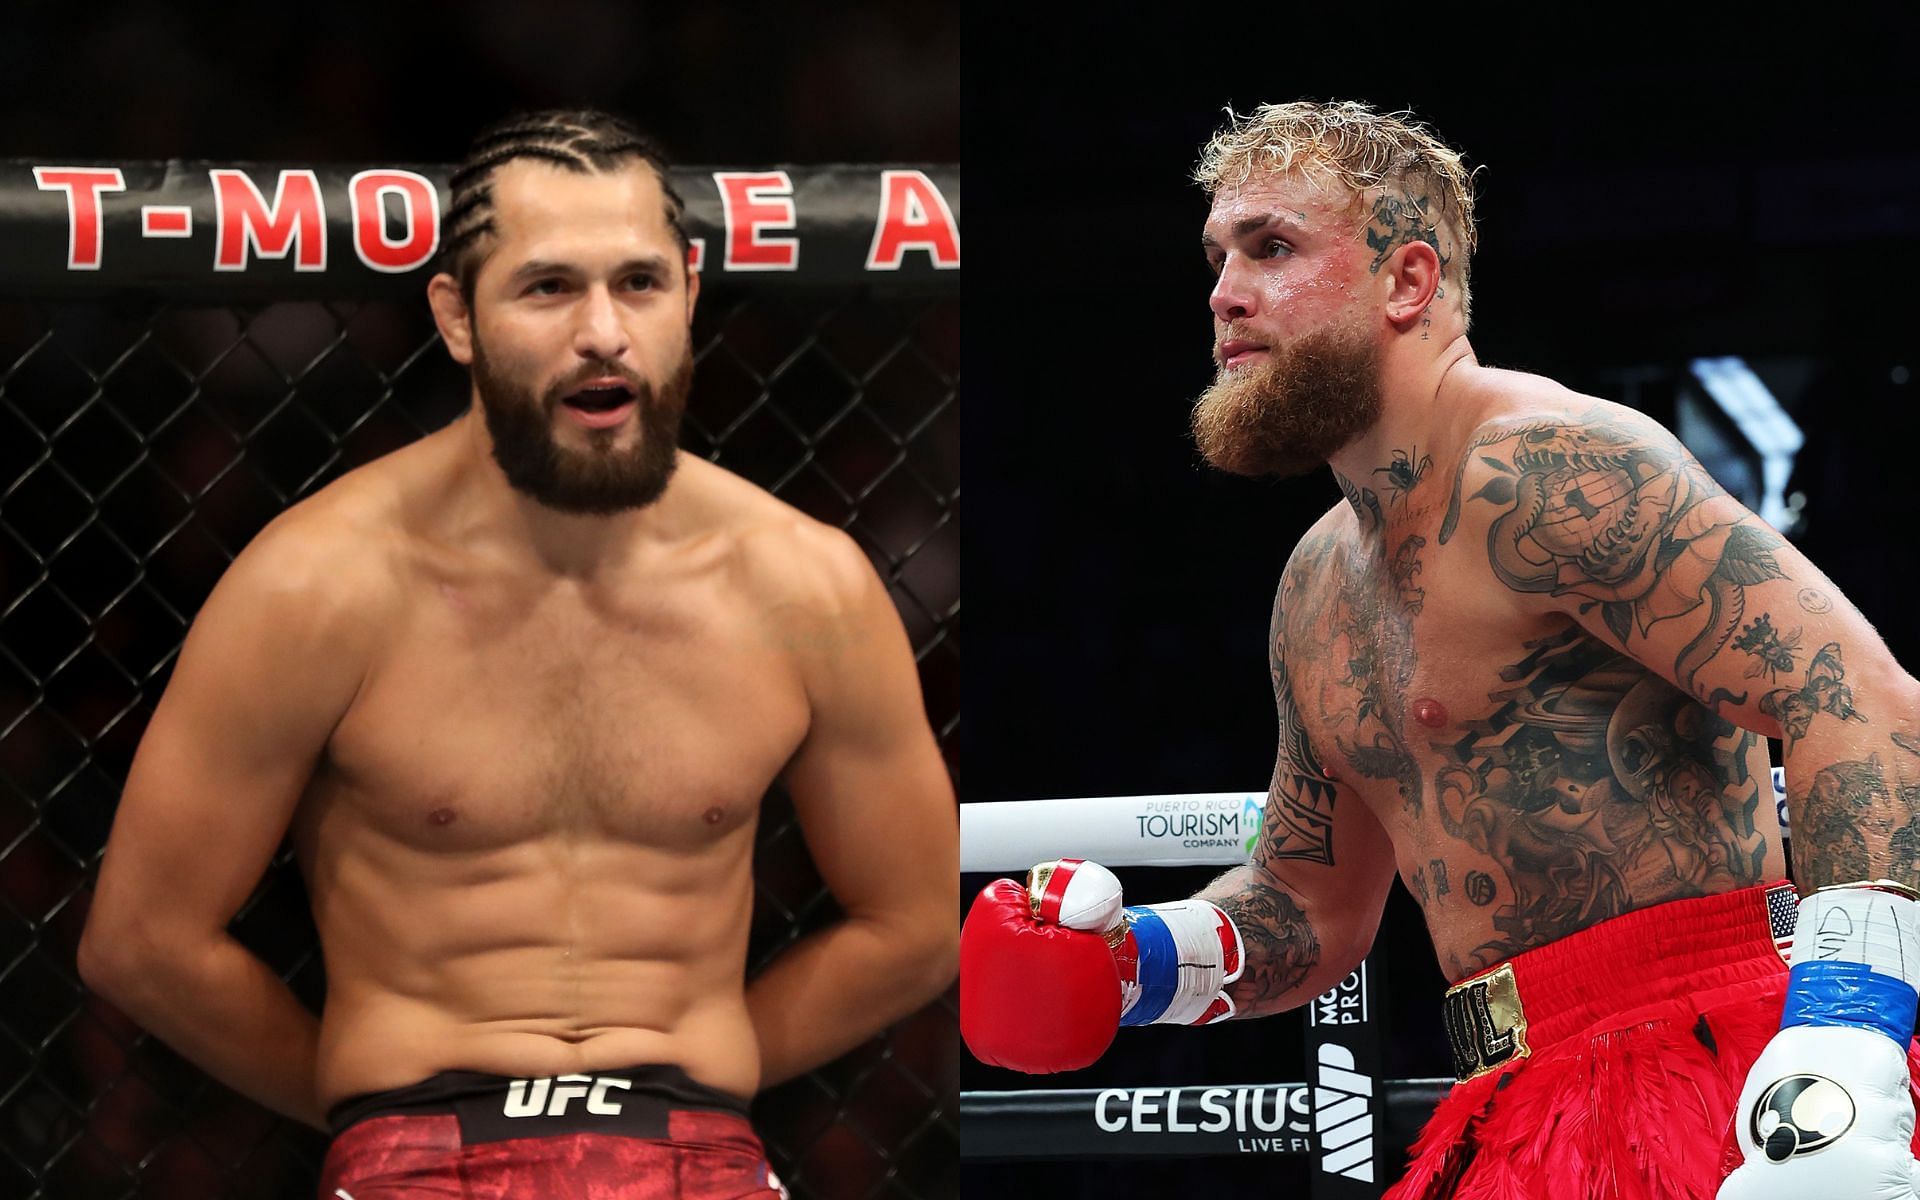 Jorge Masvidal (left) and Jake Paul (right) have long been at odds [Images courtesy: Getty Images]